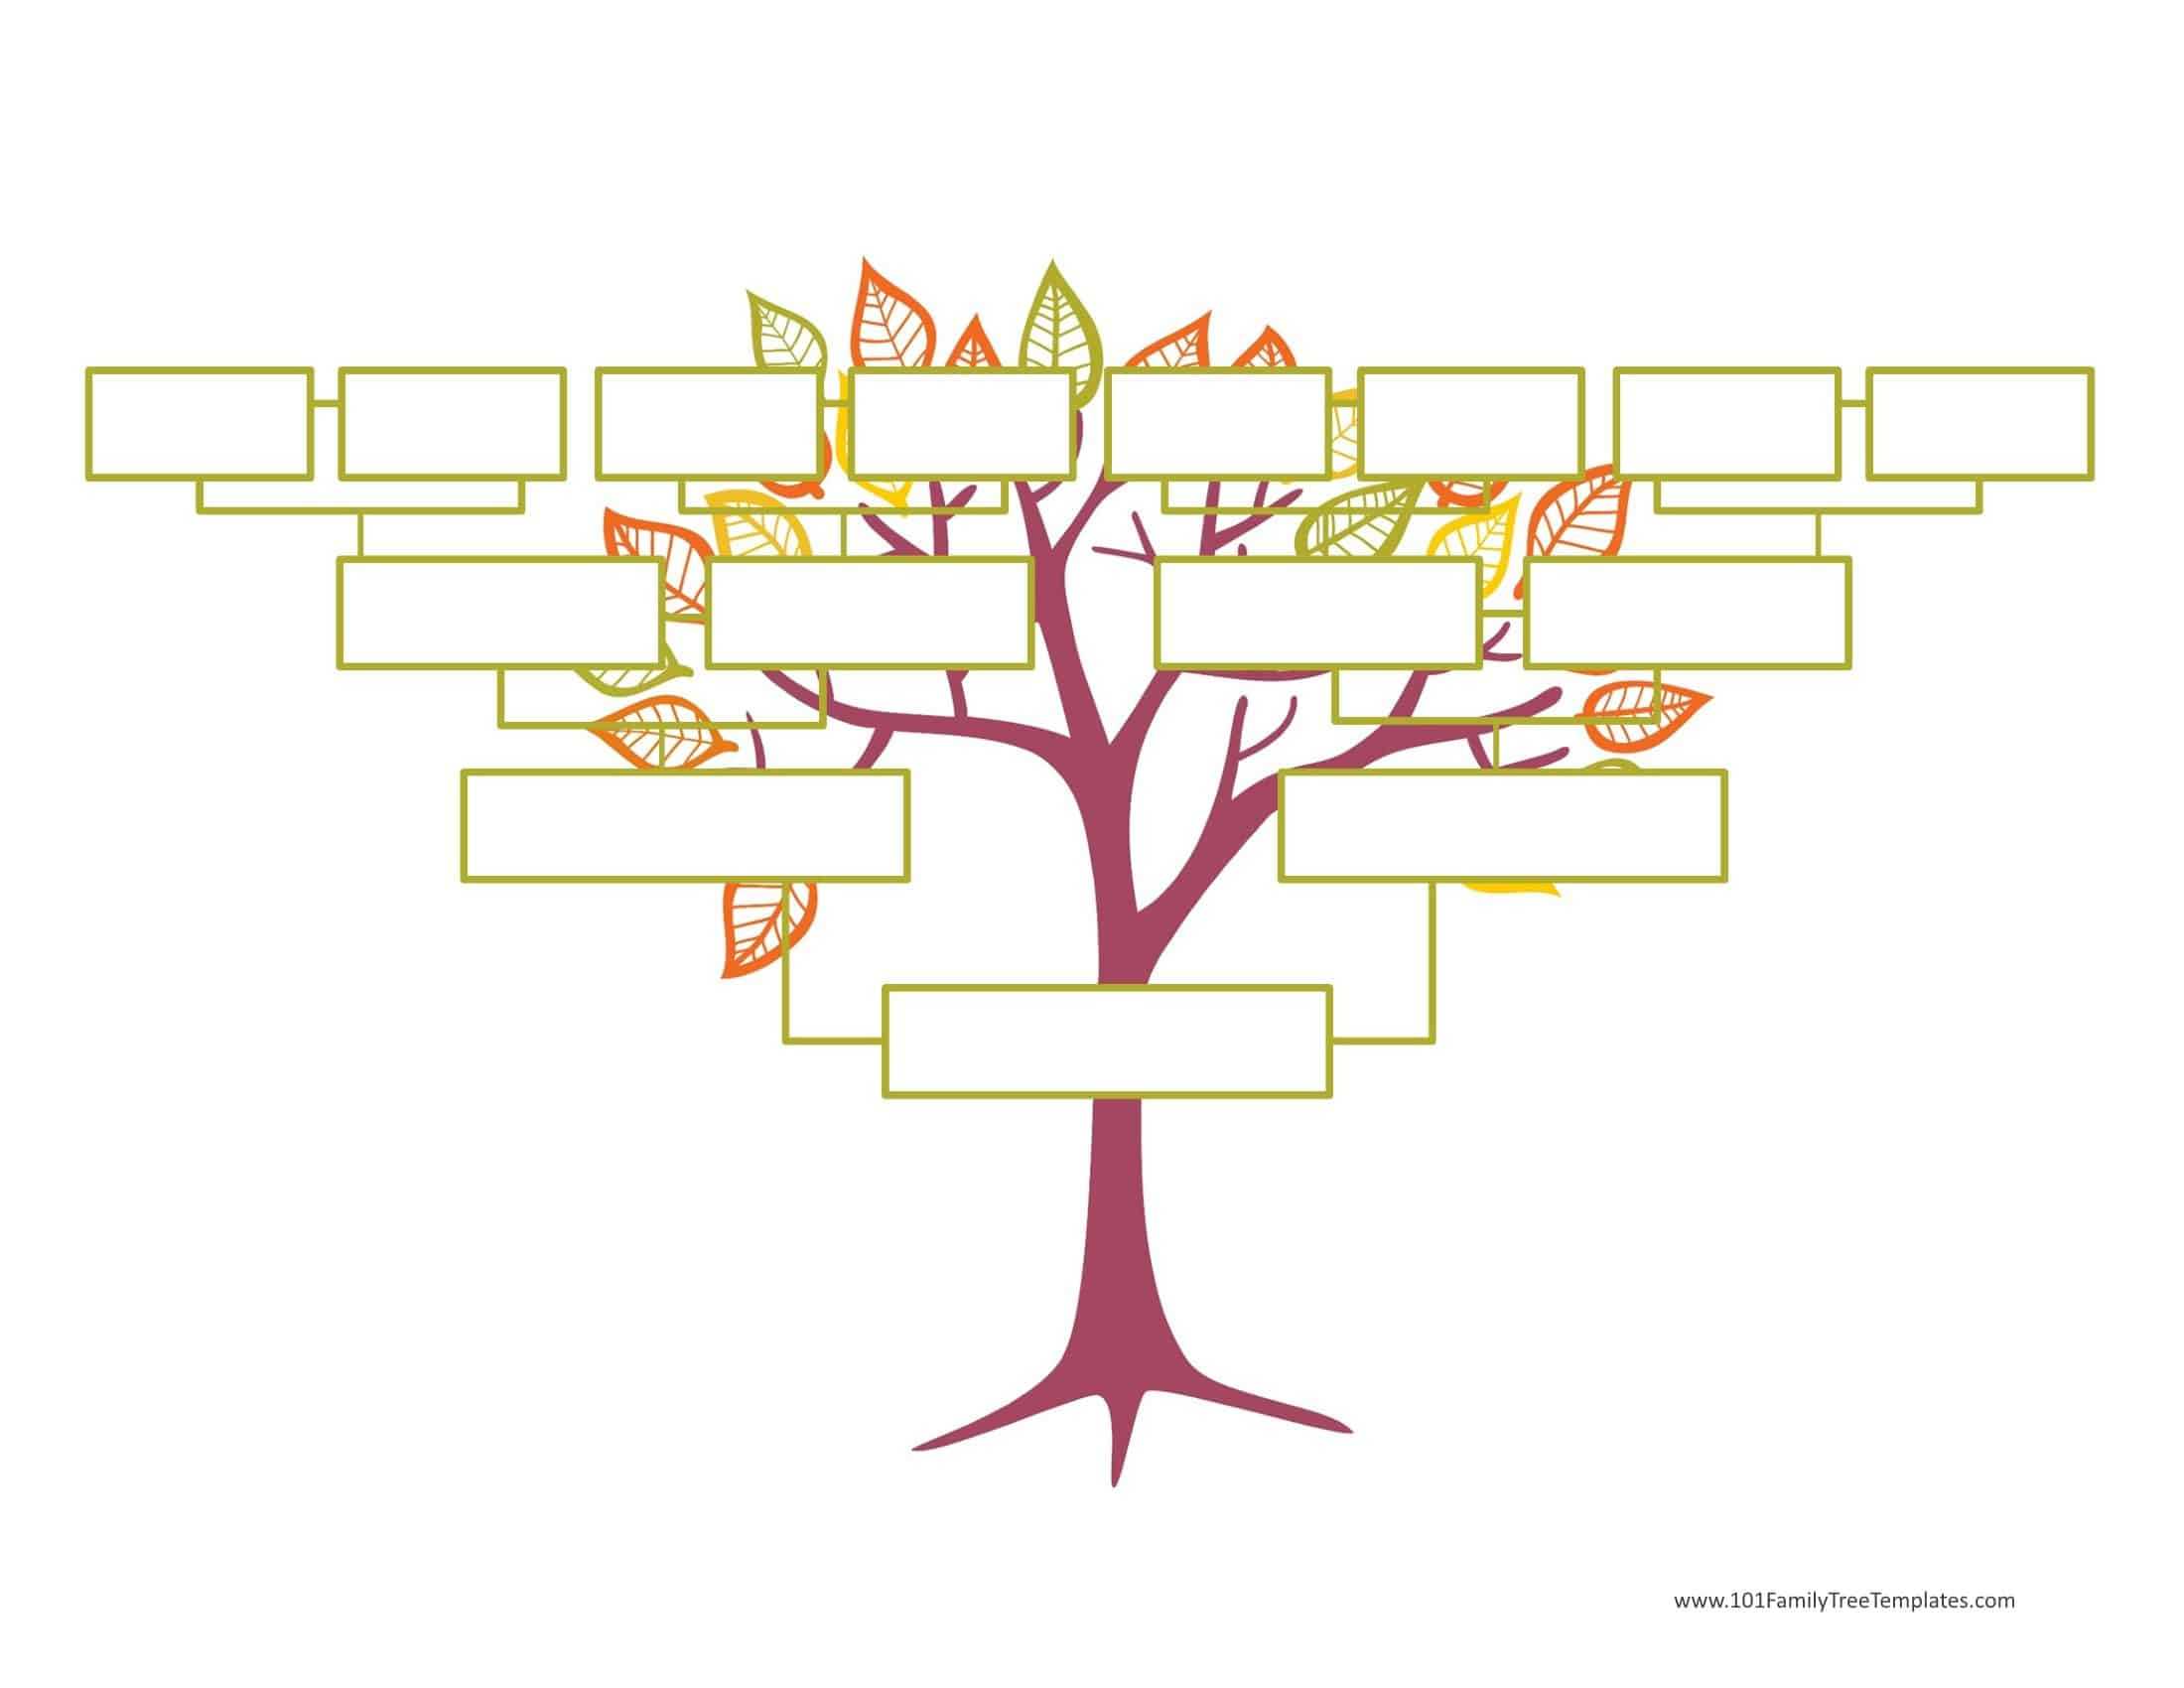 Blank Family Tree Template | Free Instant Download Inside Fill In The Blank Family Tree Template